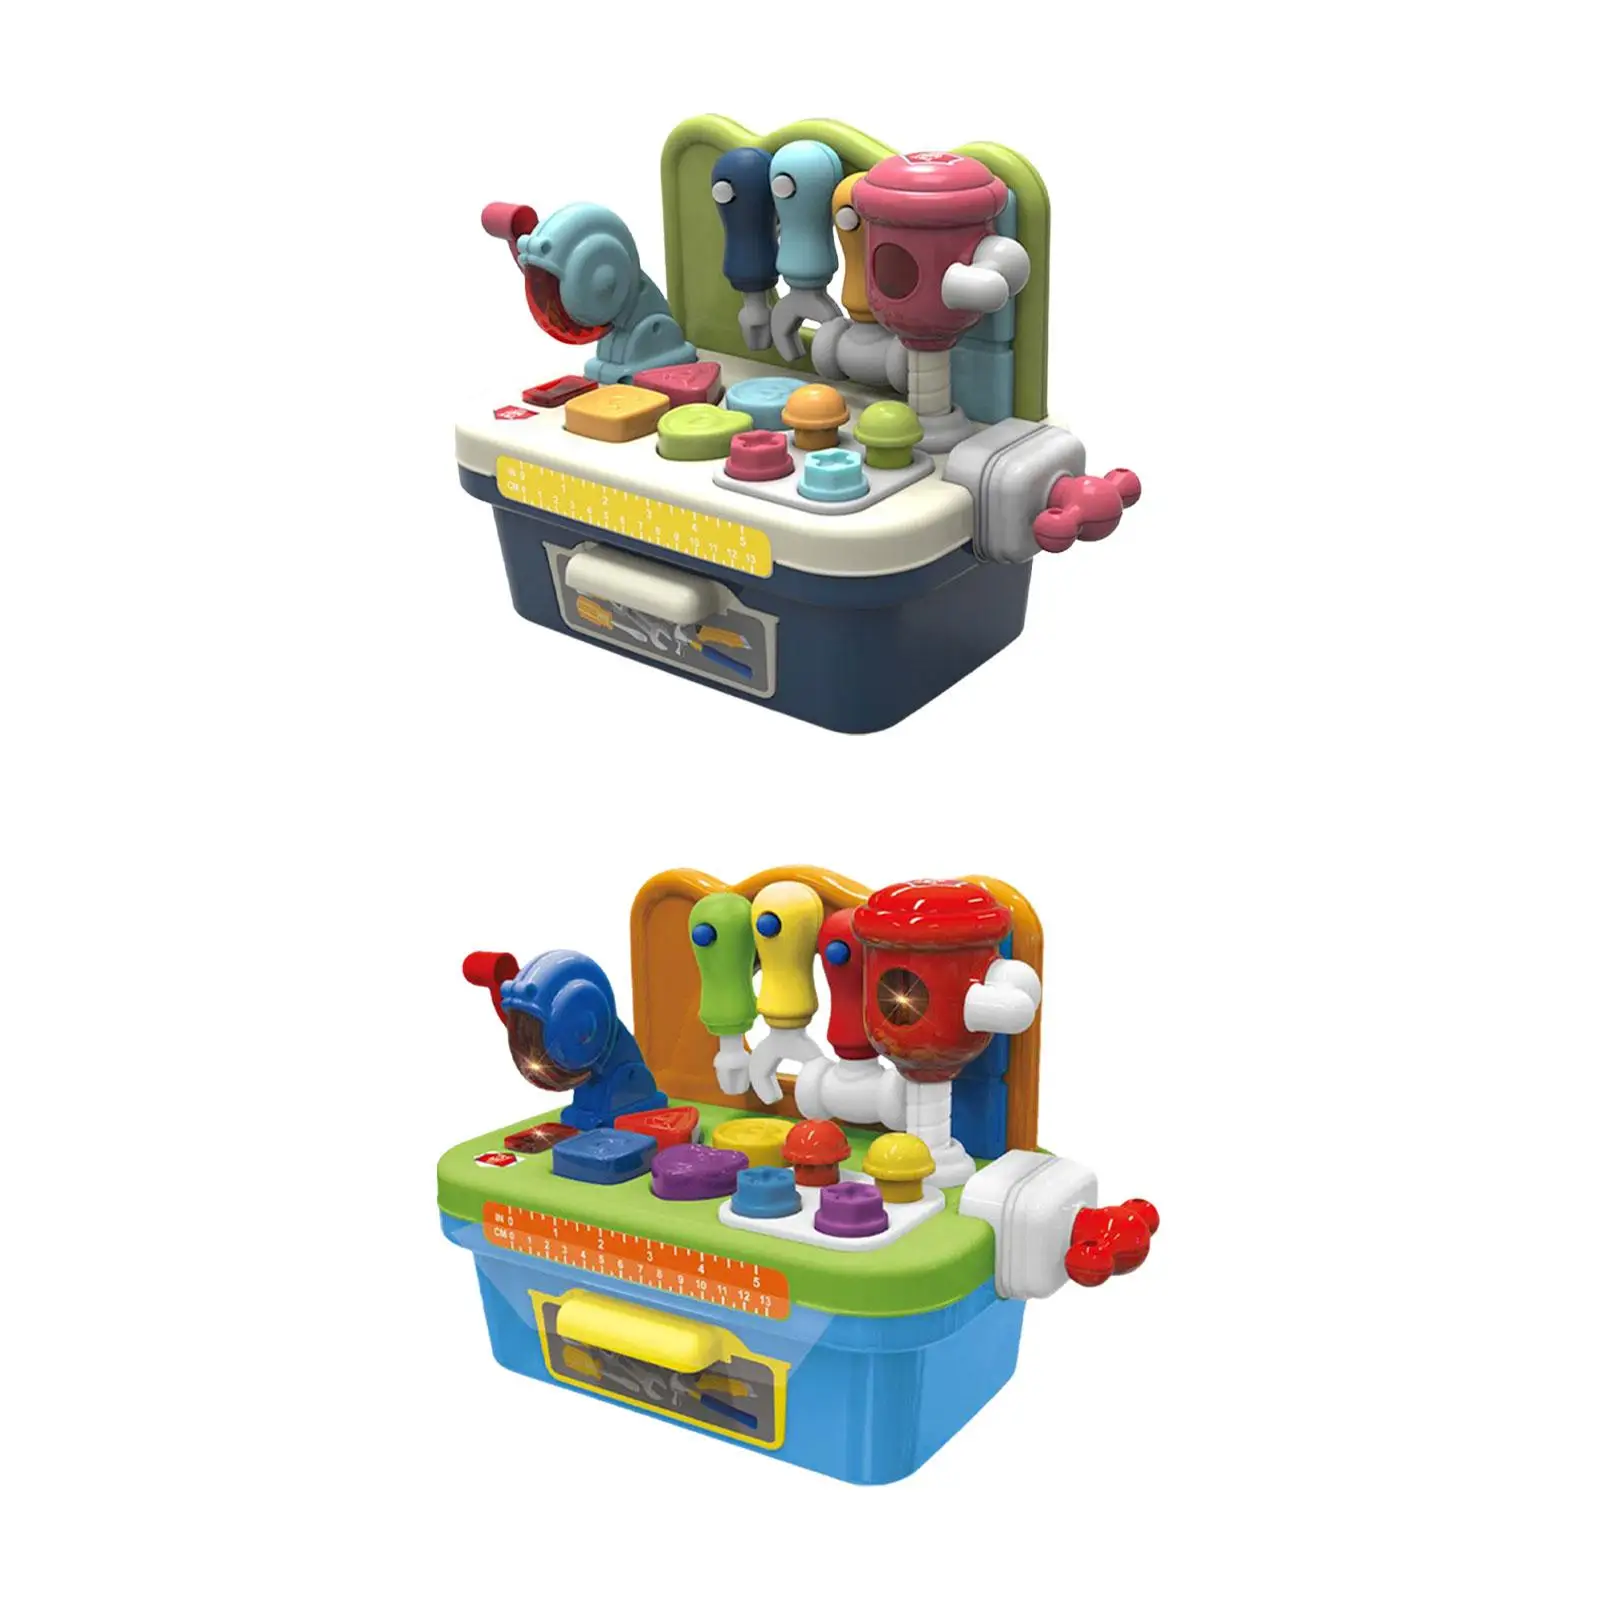 Kids Workbench Toy Shape Sorter Tool Multifunction Construction Workbench Toy for 1 2 3 4 Years Old Girls Kids Boy Birthday Gift